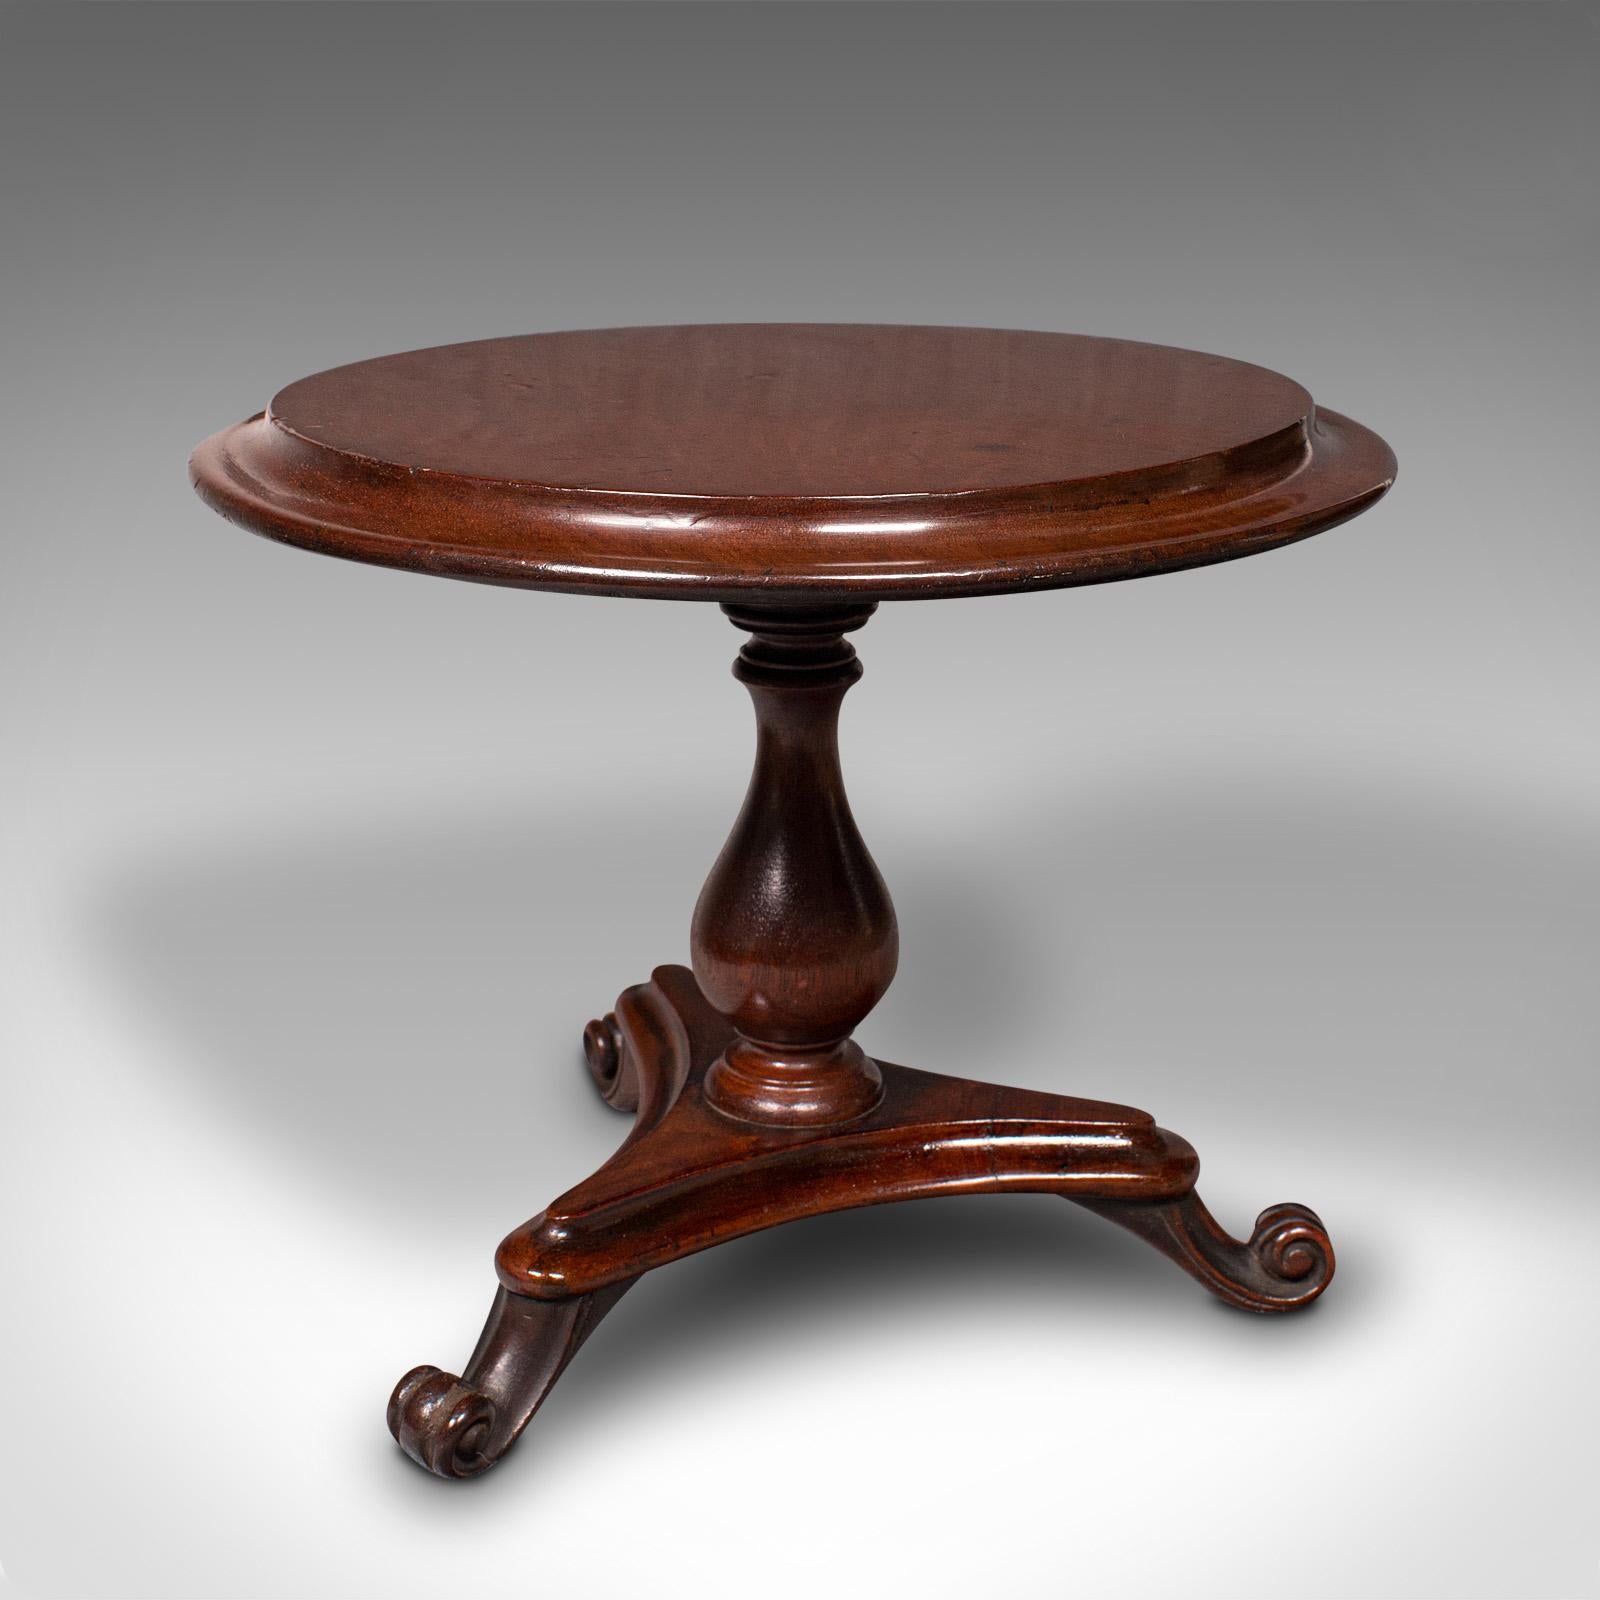 This is a small antique apprentice table. An English, mahogany example of miniature furniture, dating to the Victorian period, circa 1880.

Finely crafted apprentice piece, ideal for display or as showroom decor
Displaying a desirable aged patina